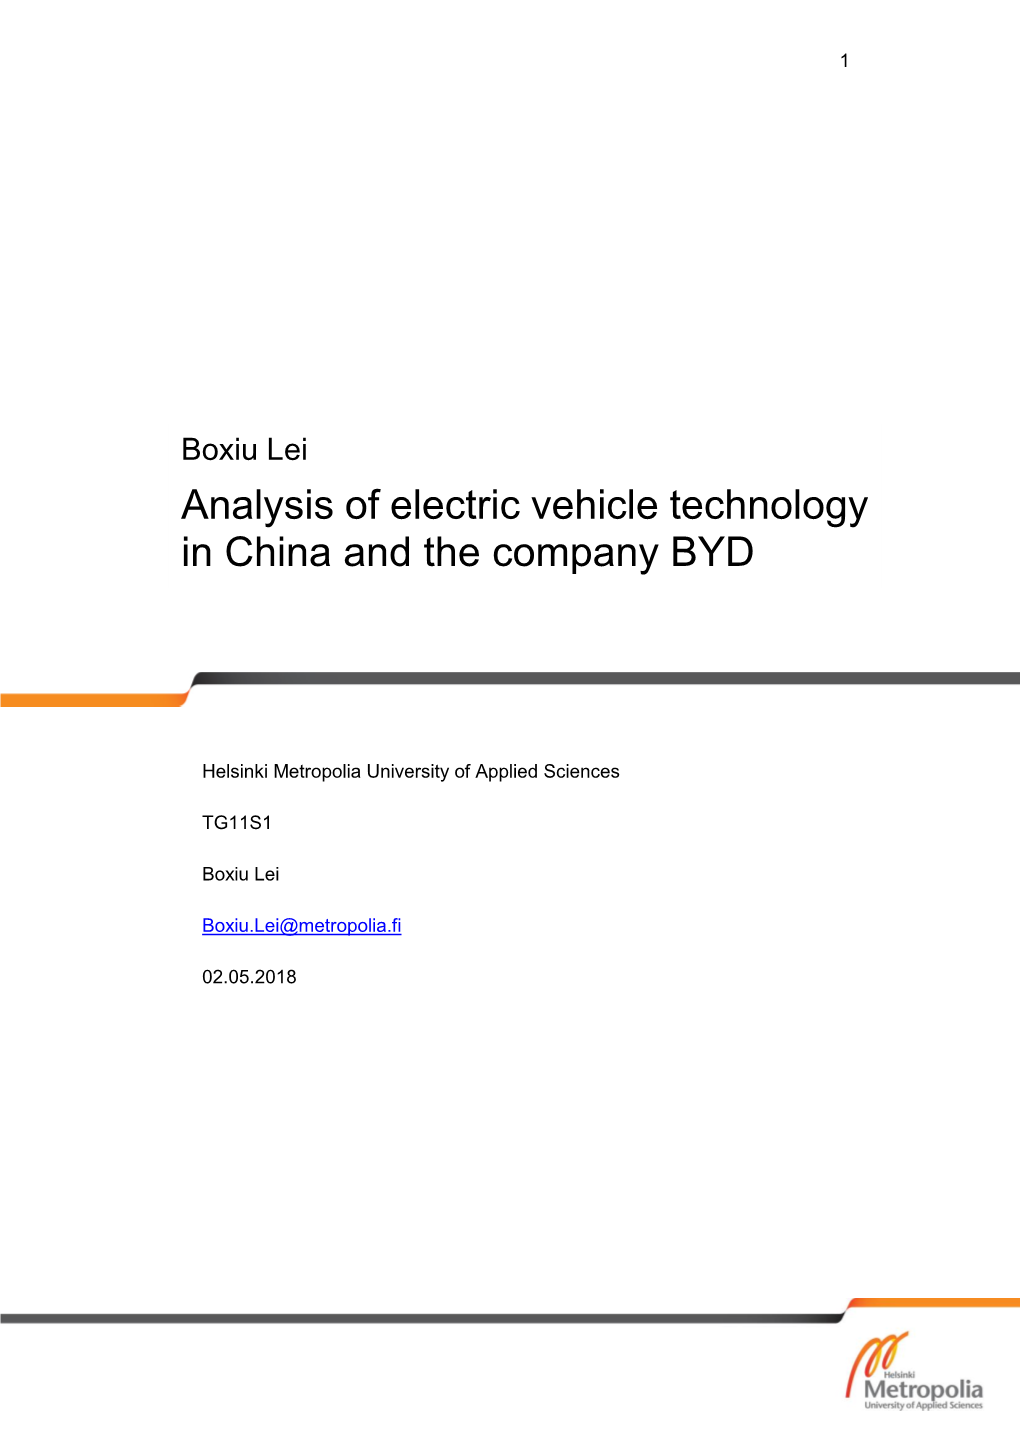 Analysis of Electric Vehicle Technology in China and the Company BYD